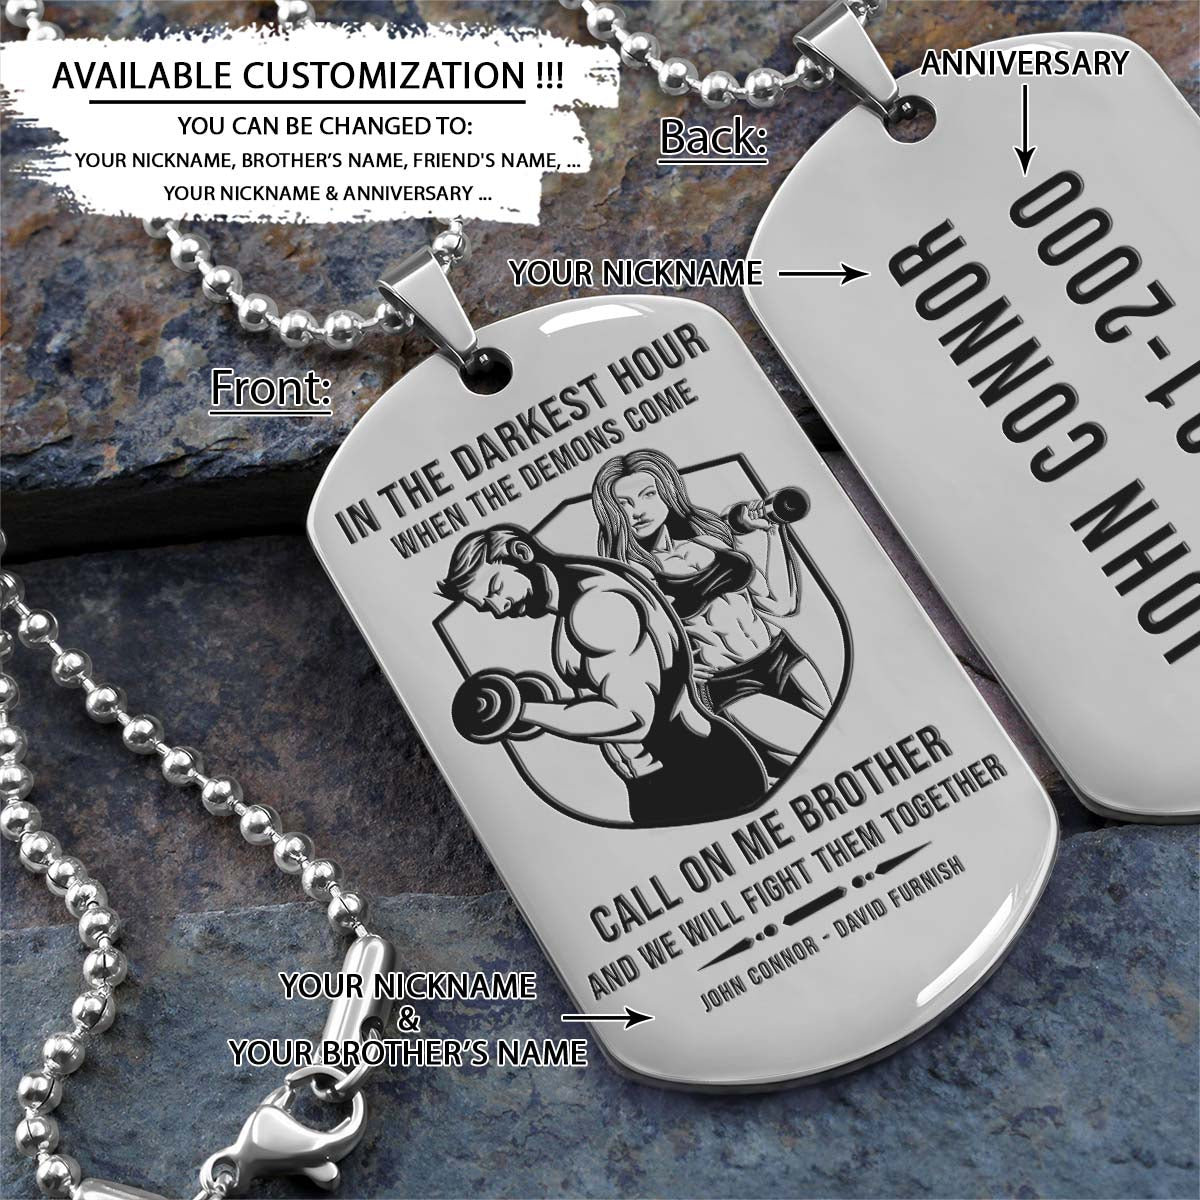 GYMD001 - Call On Me Brother - Gym - Fitness Center - Workout - Gym Dog Tag - Gym Necklace - Silver Engrave Dog Tag